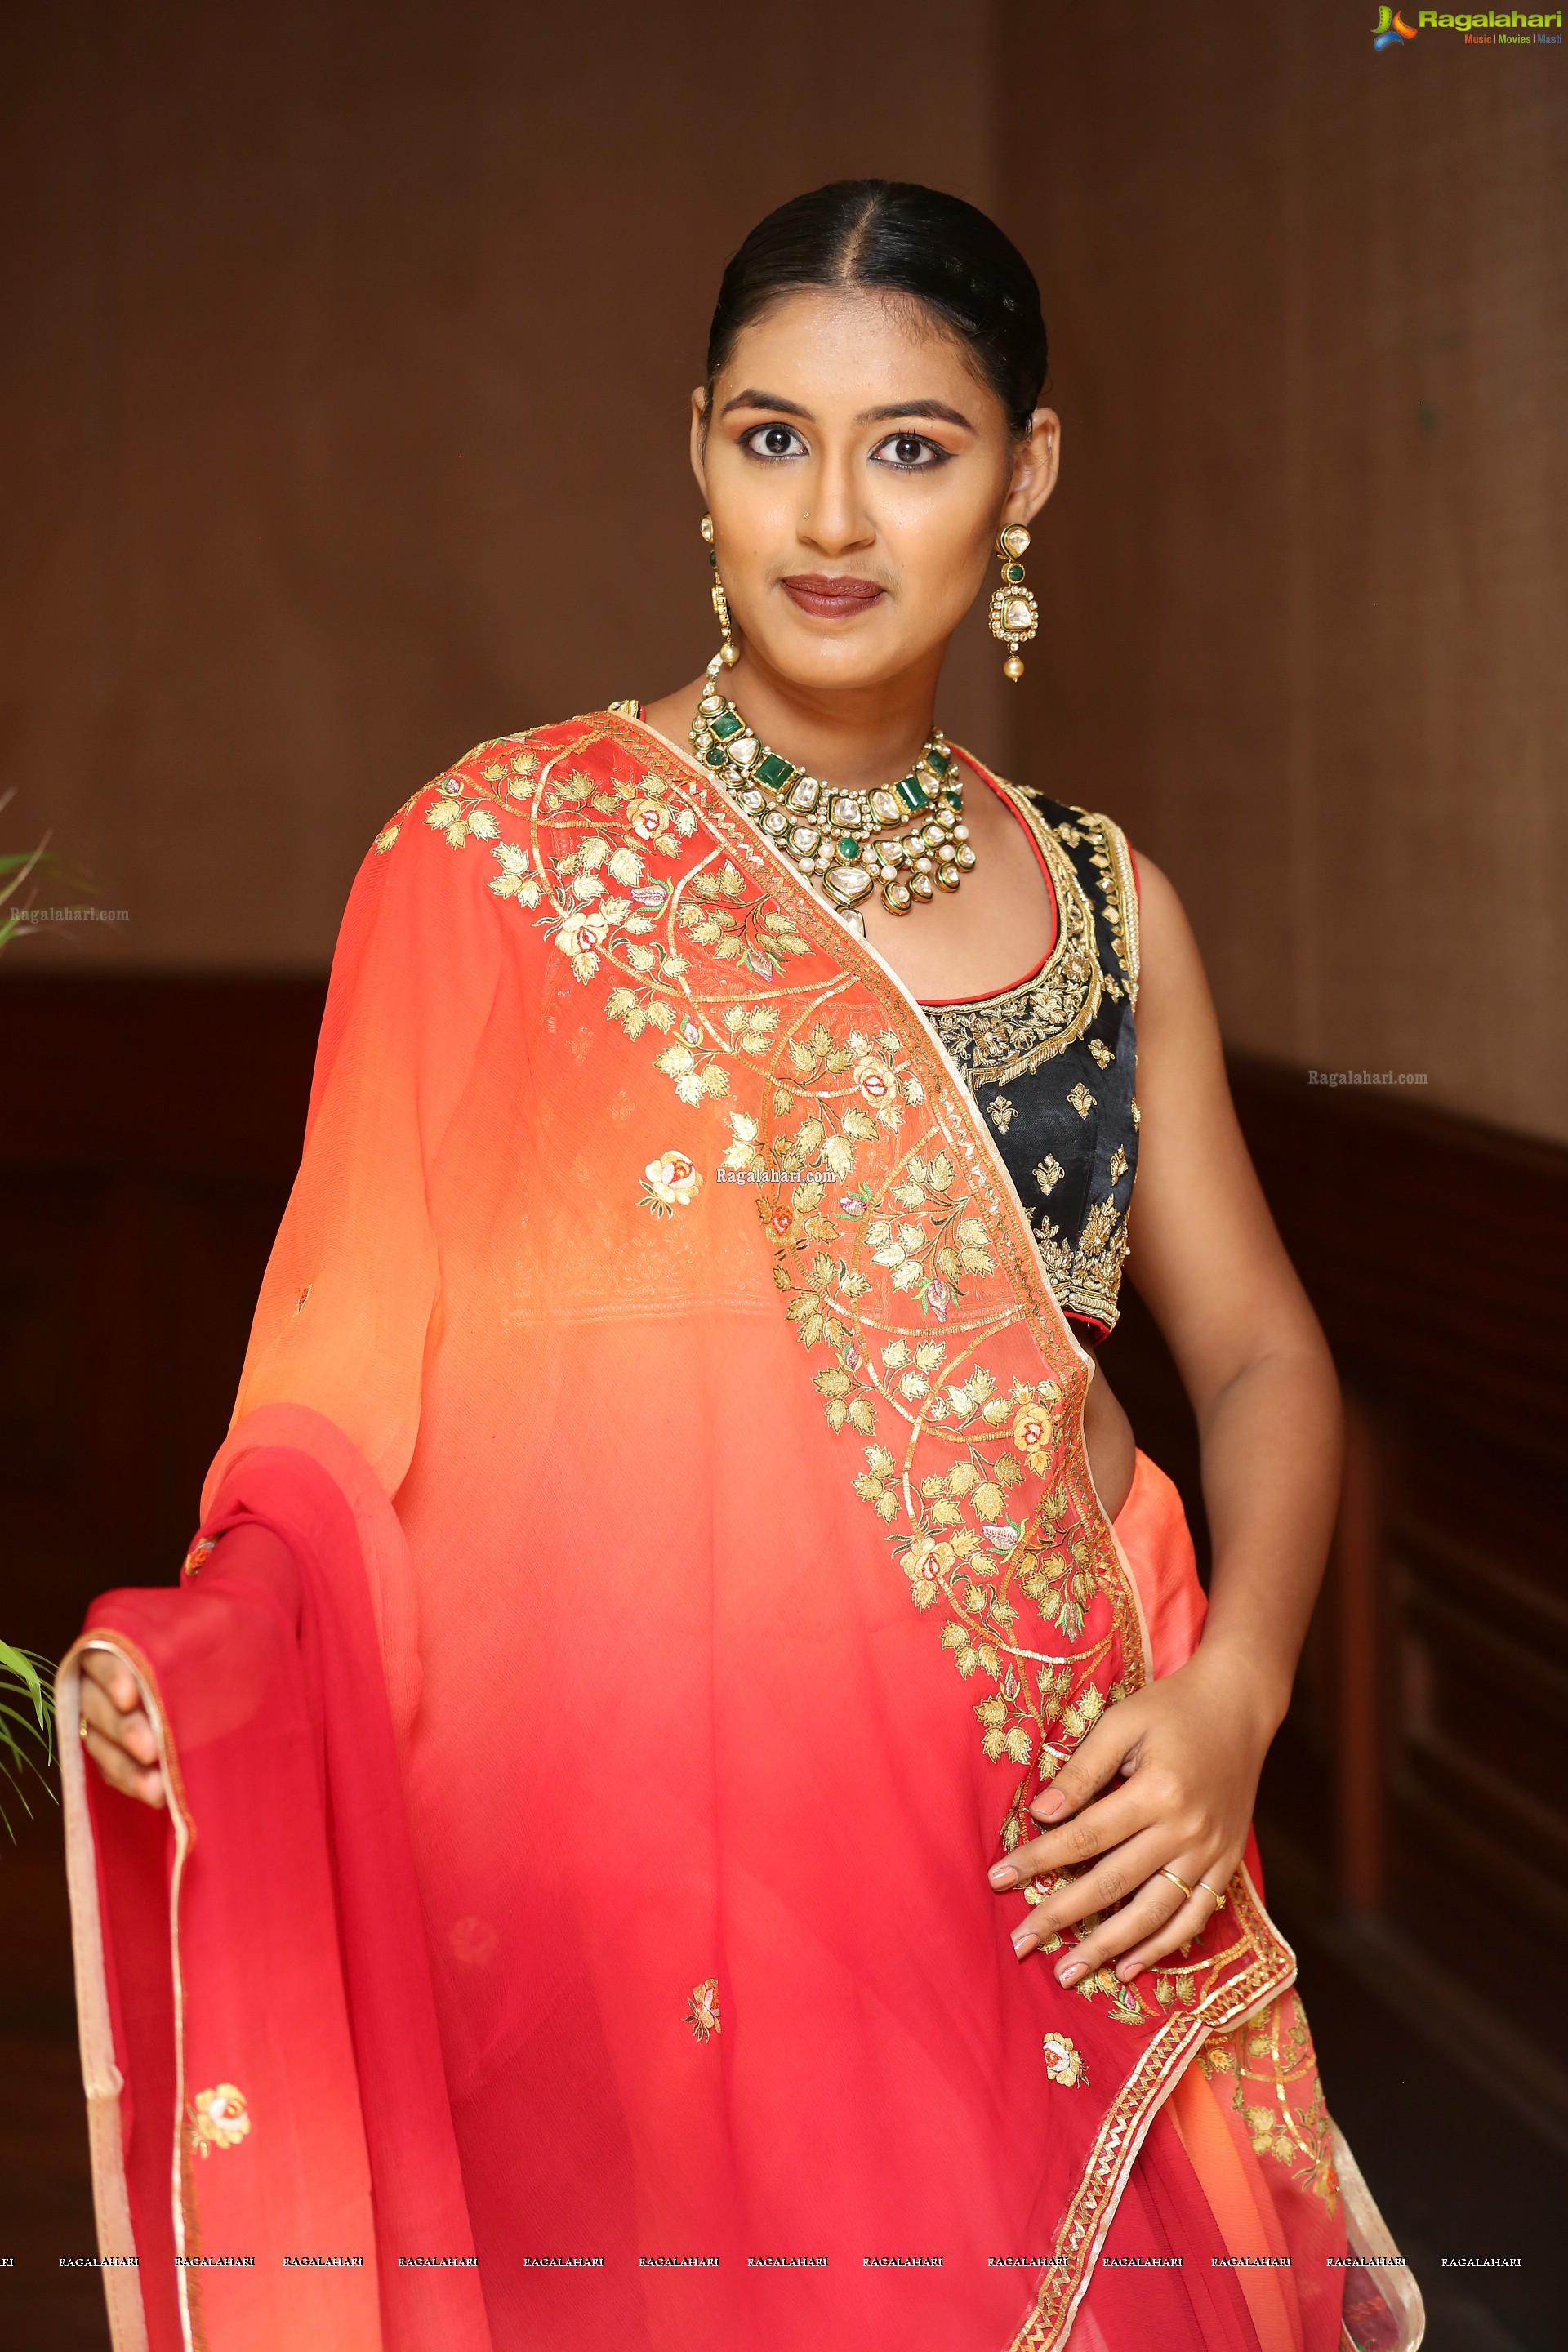 Meenal @ Royal Fables Exhibition - HD Gallery